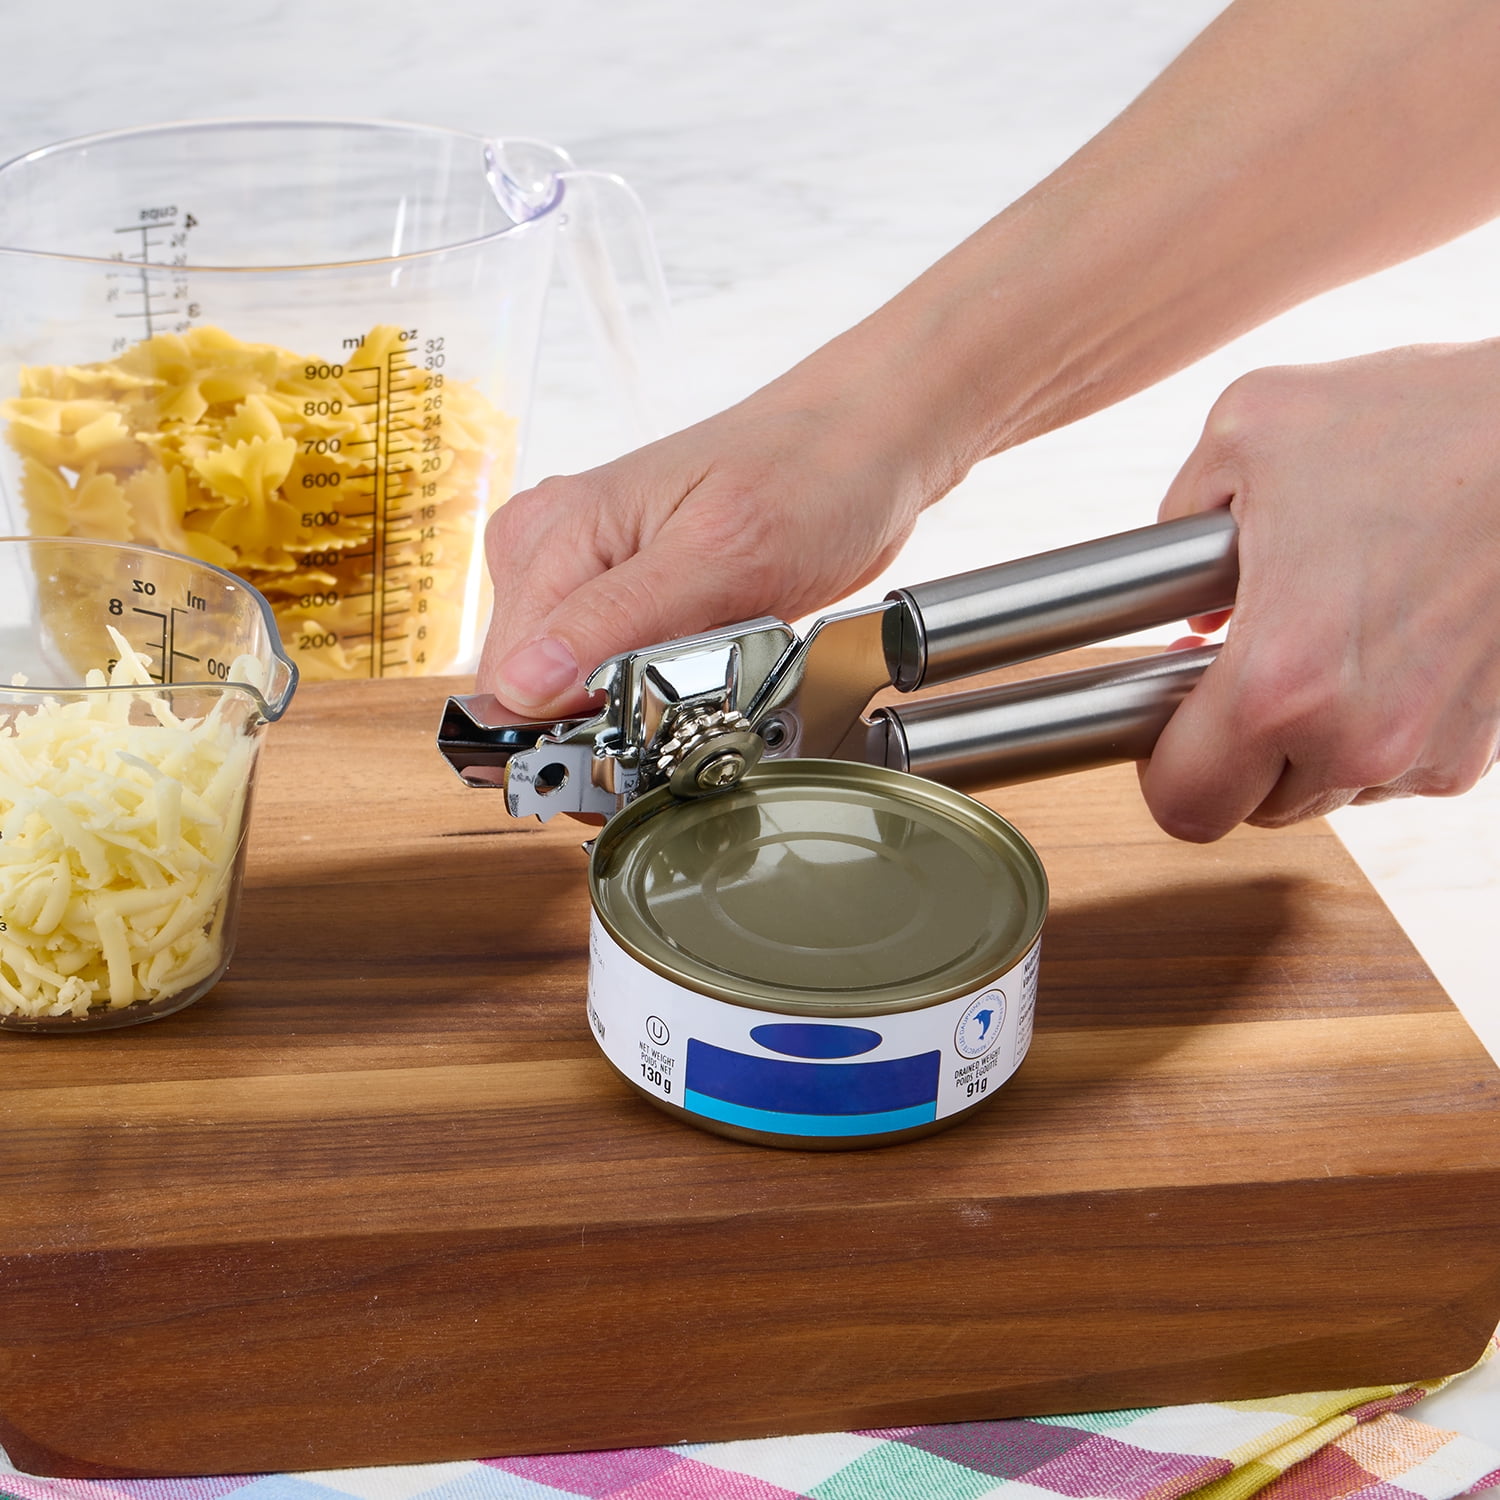 Mainstays Professional Can Opener